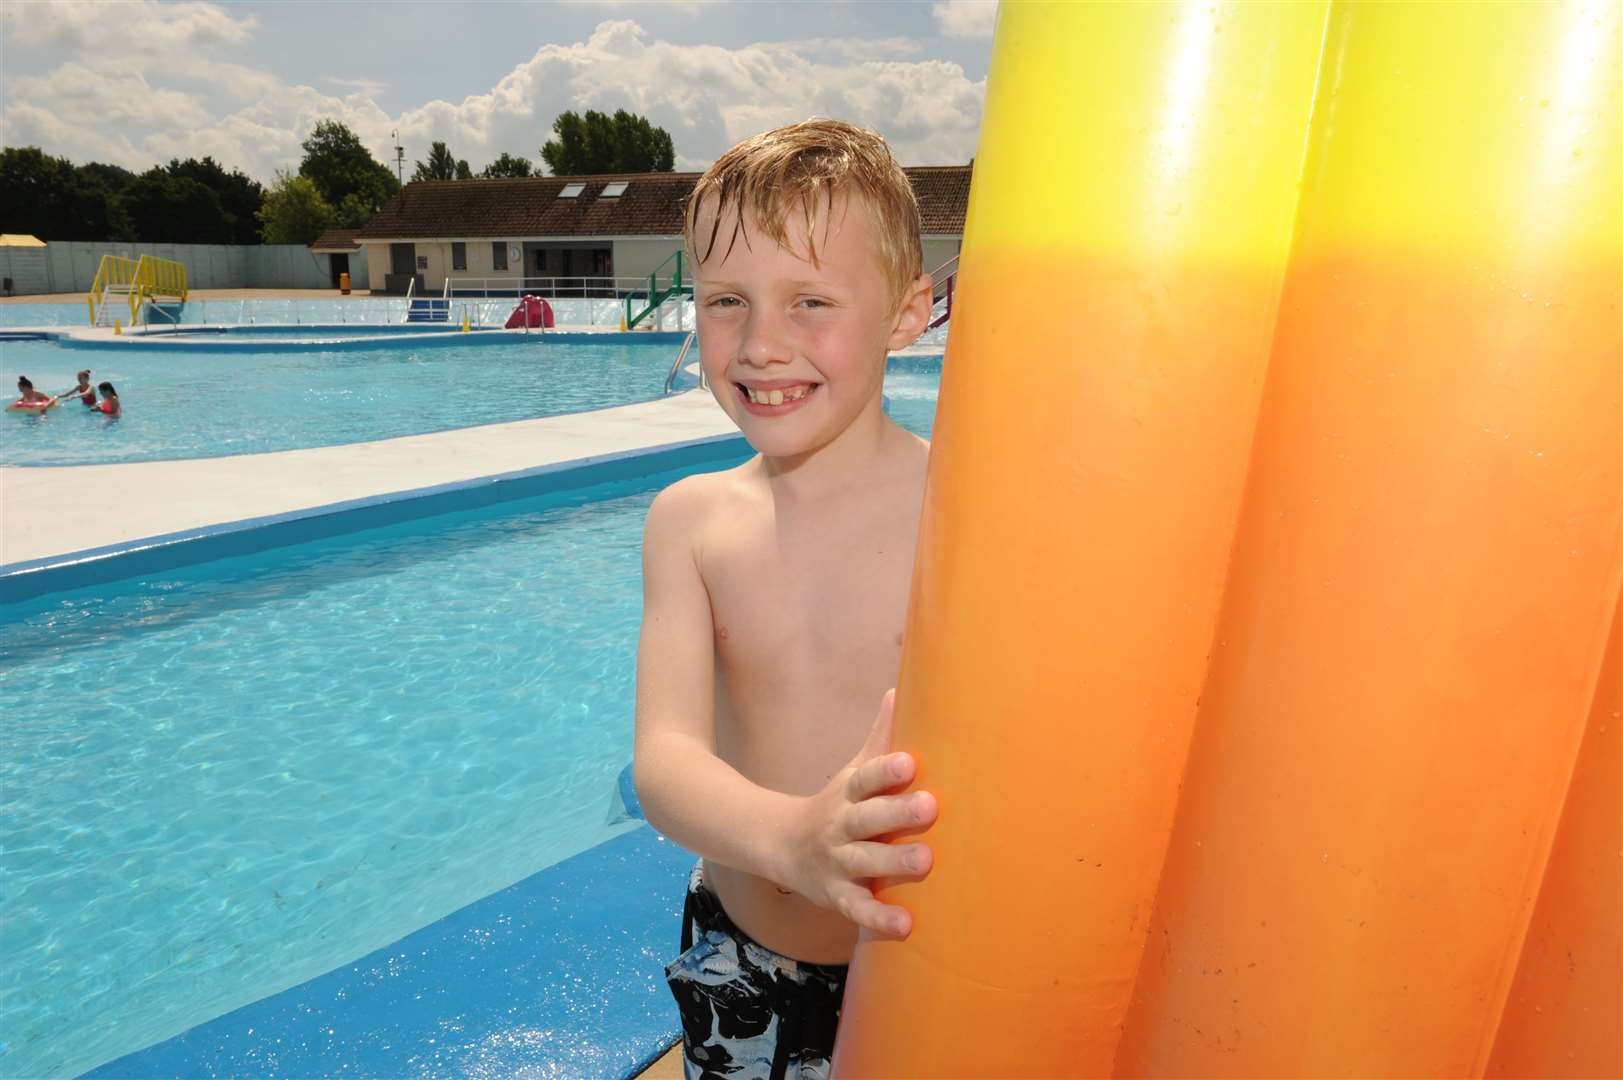 The Strand outdoor pool in Gillingham reopens later this month